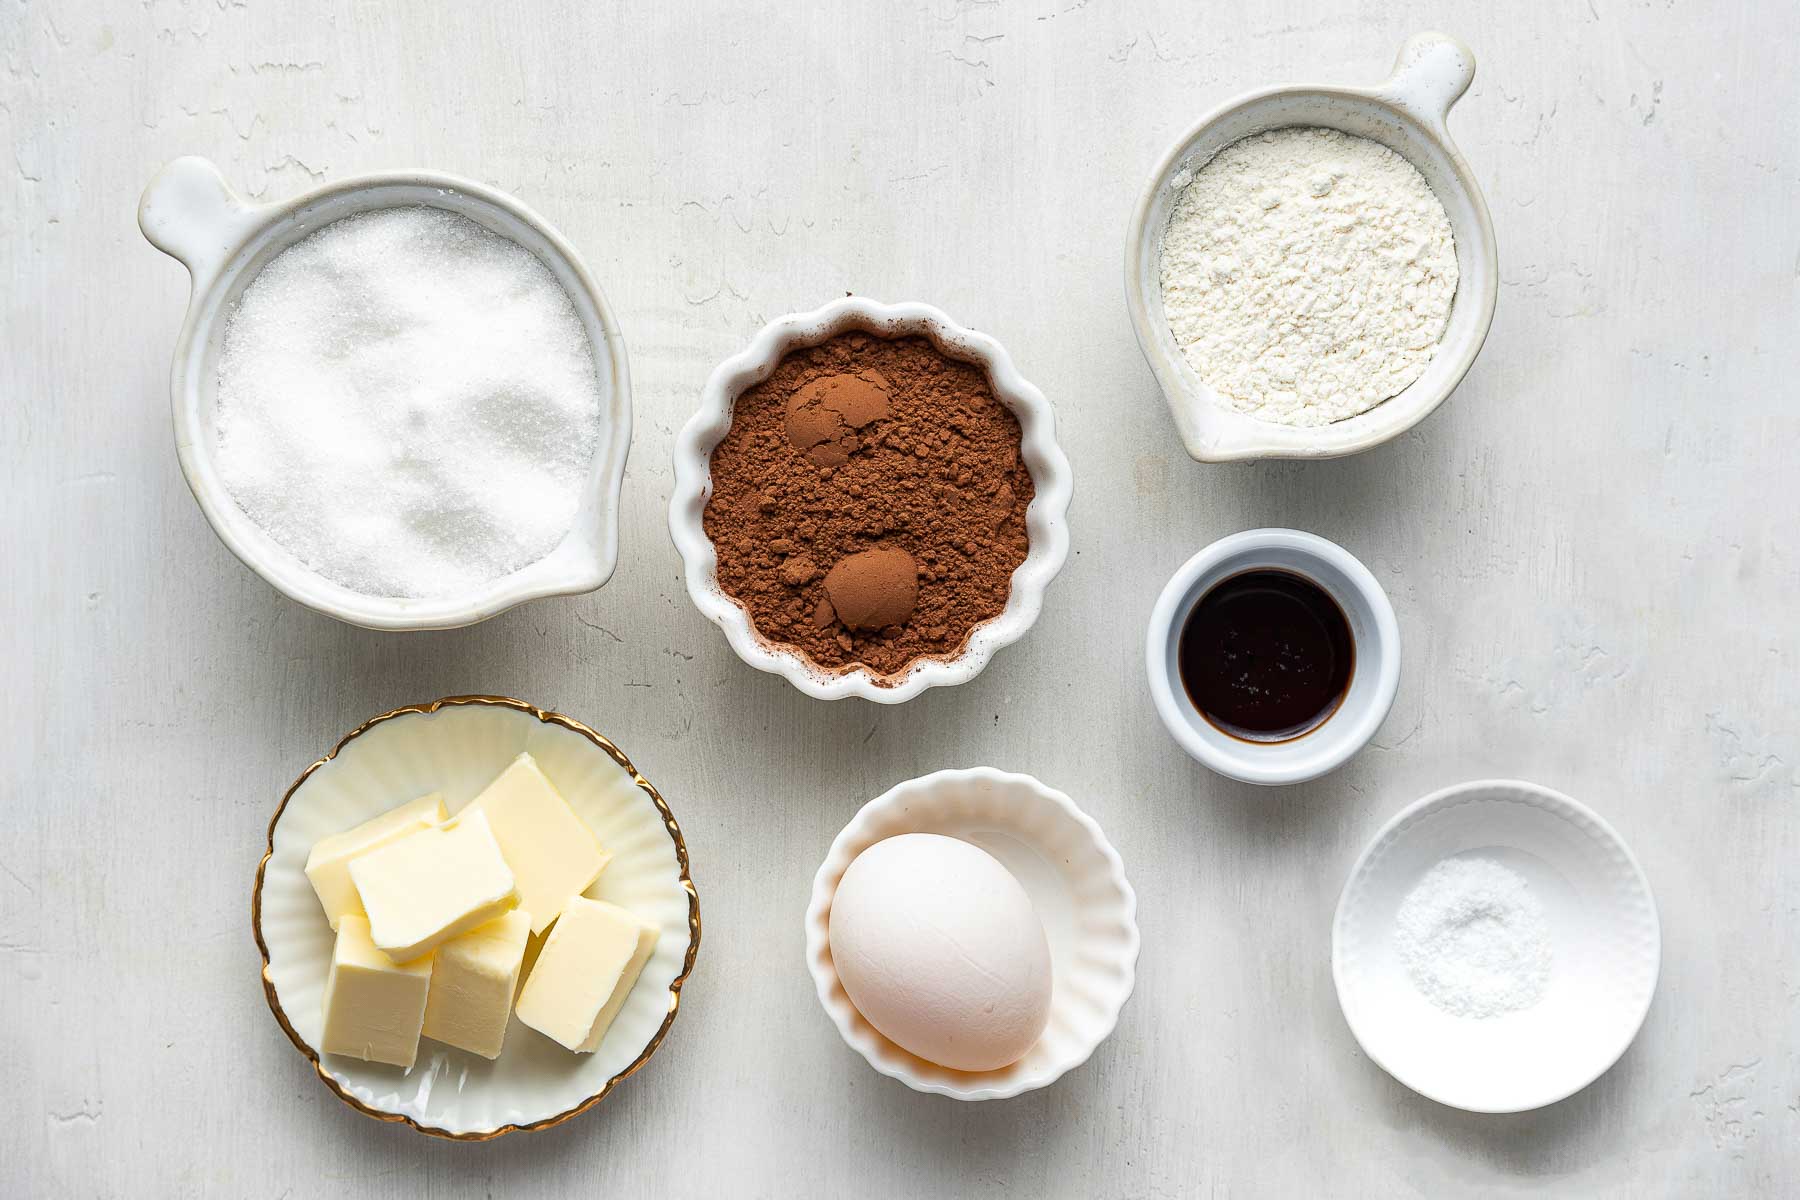 Sugar, butter, flour, egg and cocoa powder in small bowls on white surface.